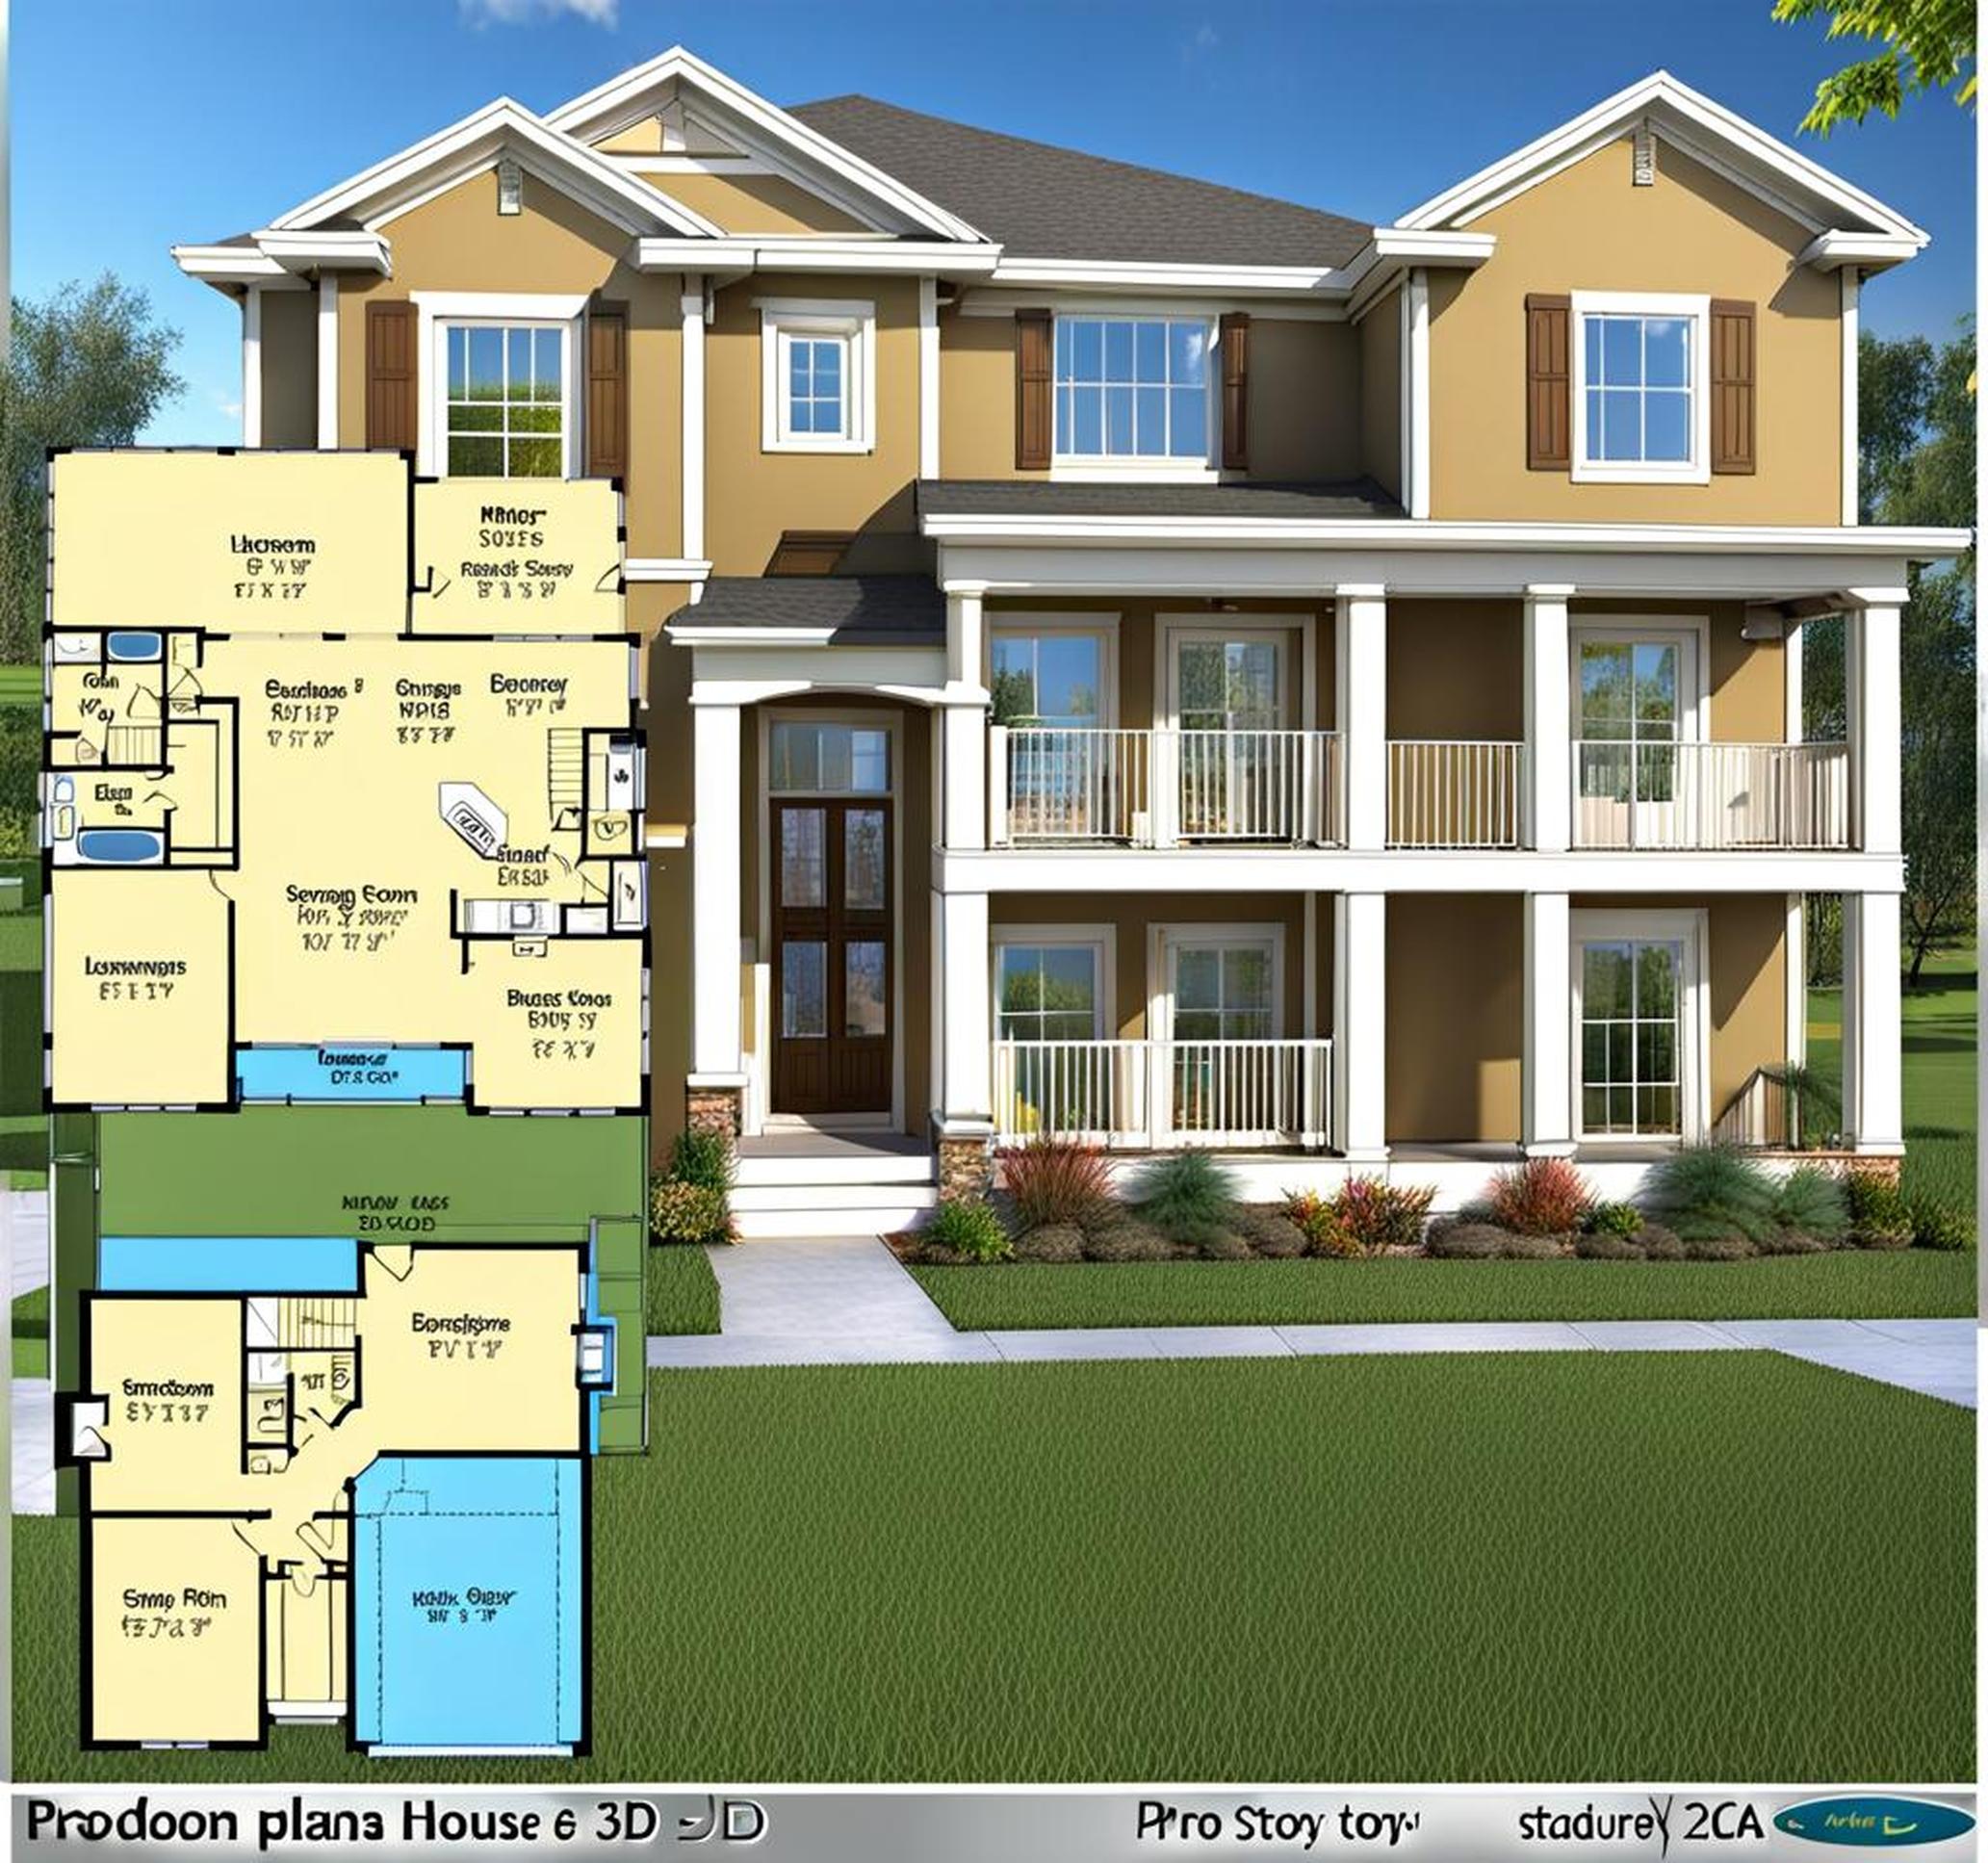 Design Your Perfect 5 Bedroom Home with Customizable 2 Story 3D House Plans